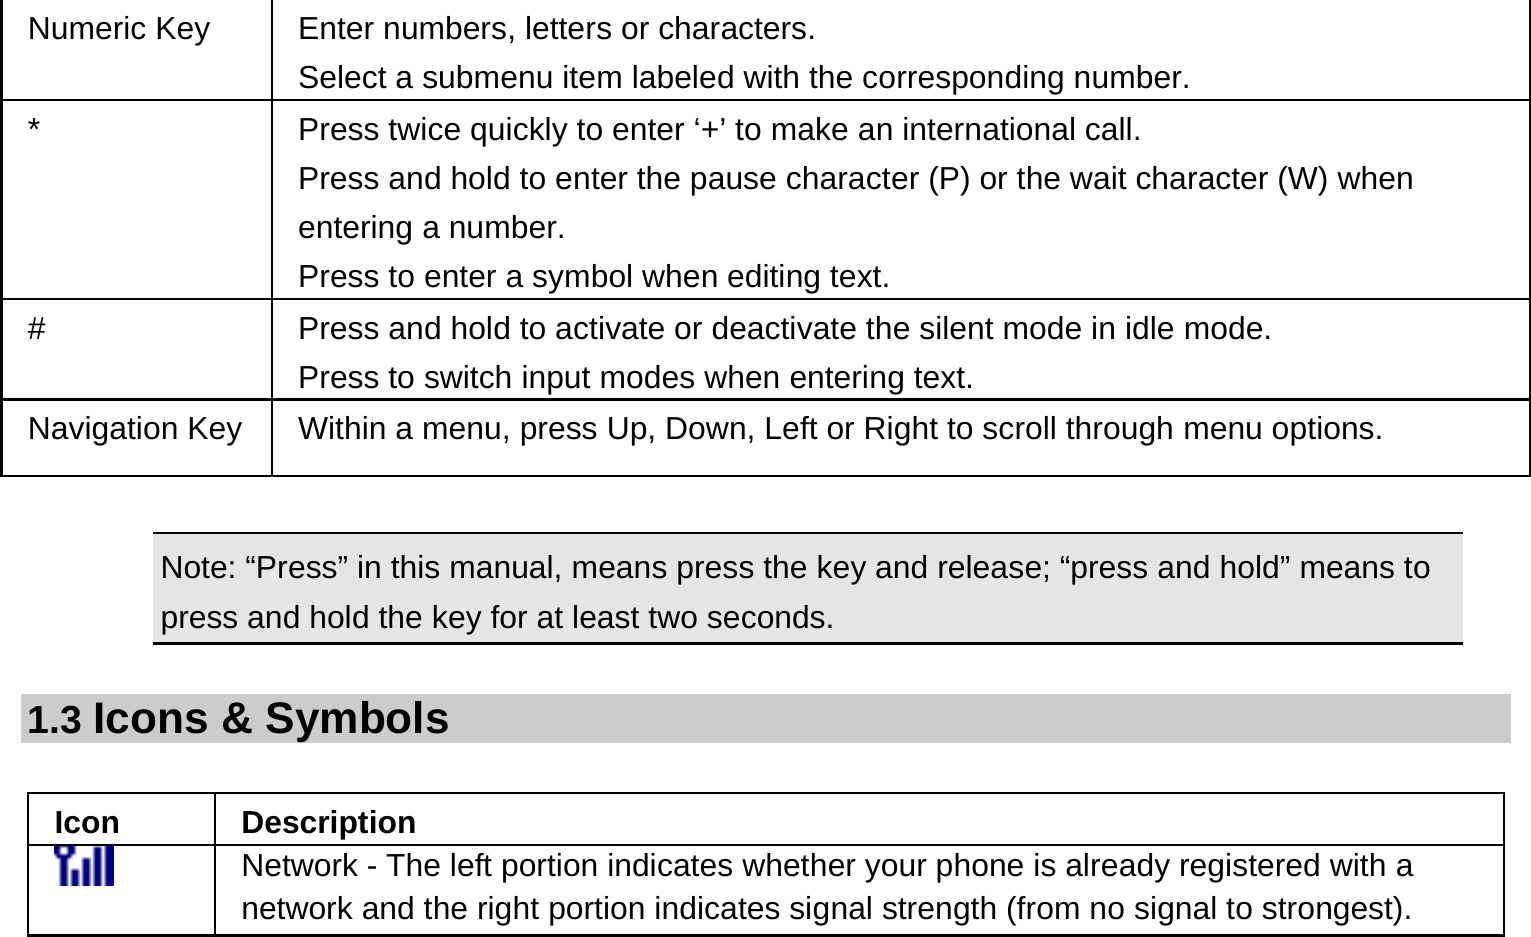 Numeric Key  Enter numbers, letters or characters.   Select a submenu item labeled with the corresponding number.   *  Press twice quickly to enter ‘+’ to make an international call.   Press and hold to enter the pause character (P) or the wait character (W) when entering a number.   Press to enter a symbol when editing text. #  Press and hold to activate or deactivate the silent mode in idle mode.   Press to switch input modes when entering text. Navigation Key Within a menu, press Up, Down, Left or Right to scroll through menu options.    Note: “Press” in this manual, means press the key and release; “press and hold” means to press and hold the key for at least two seconds.  1.3 Icons &amp; Symbols  Icon Description  Network - The left portion indicates whether your phone is already registered with a network and the right portion indicates signal strength (from no signal to strongest). 